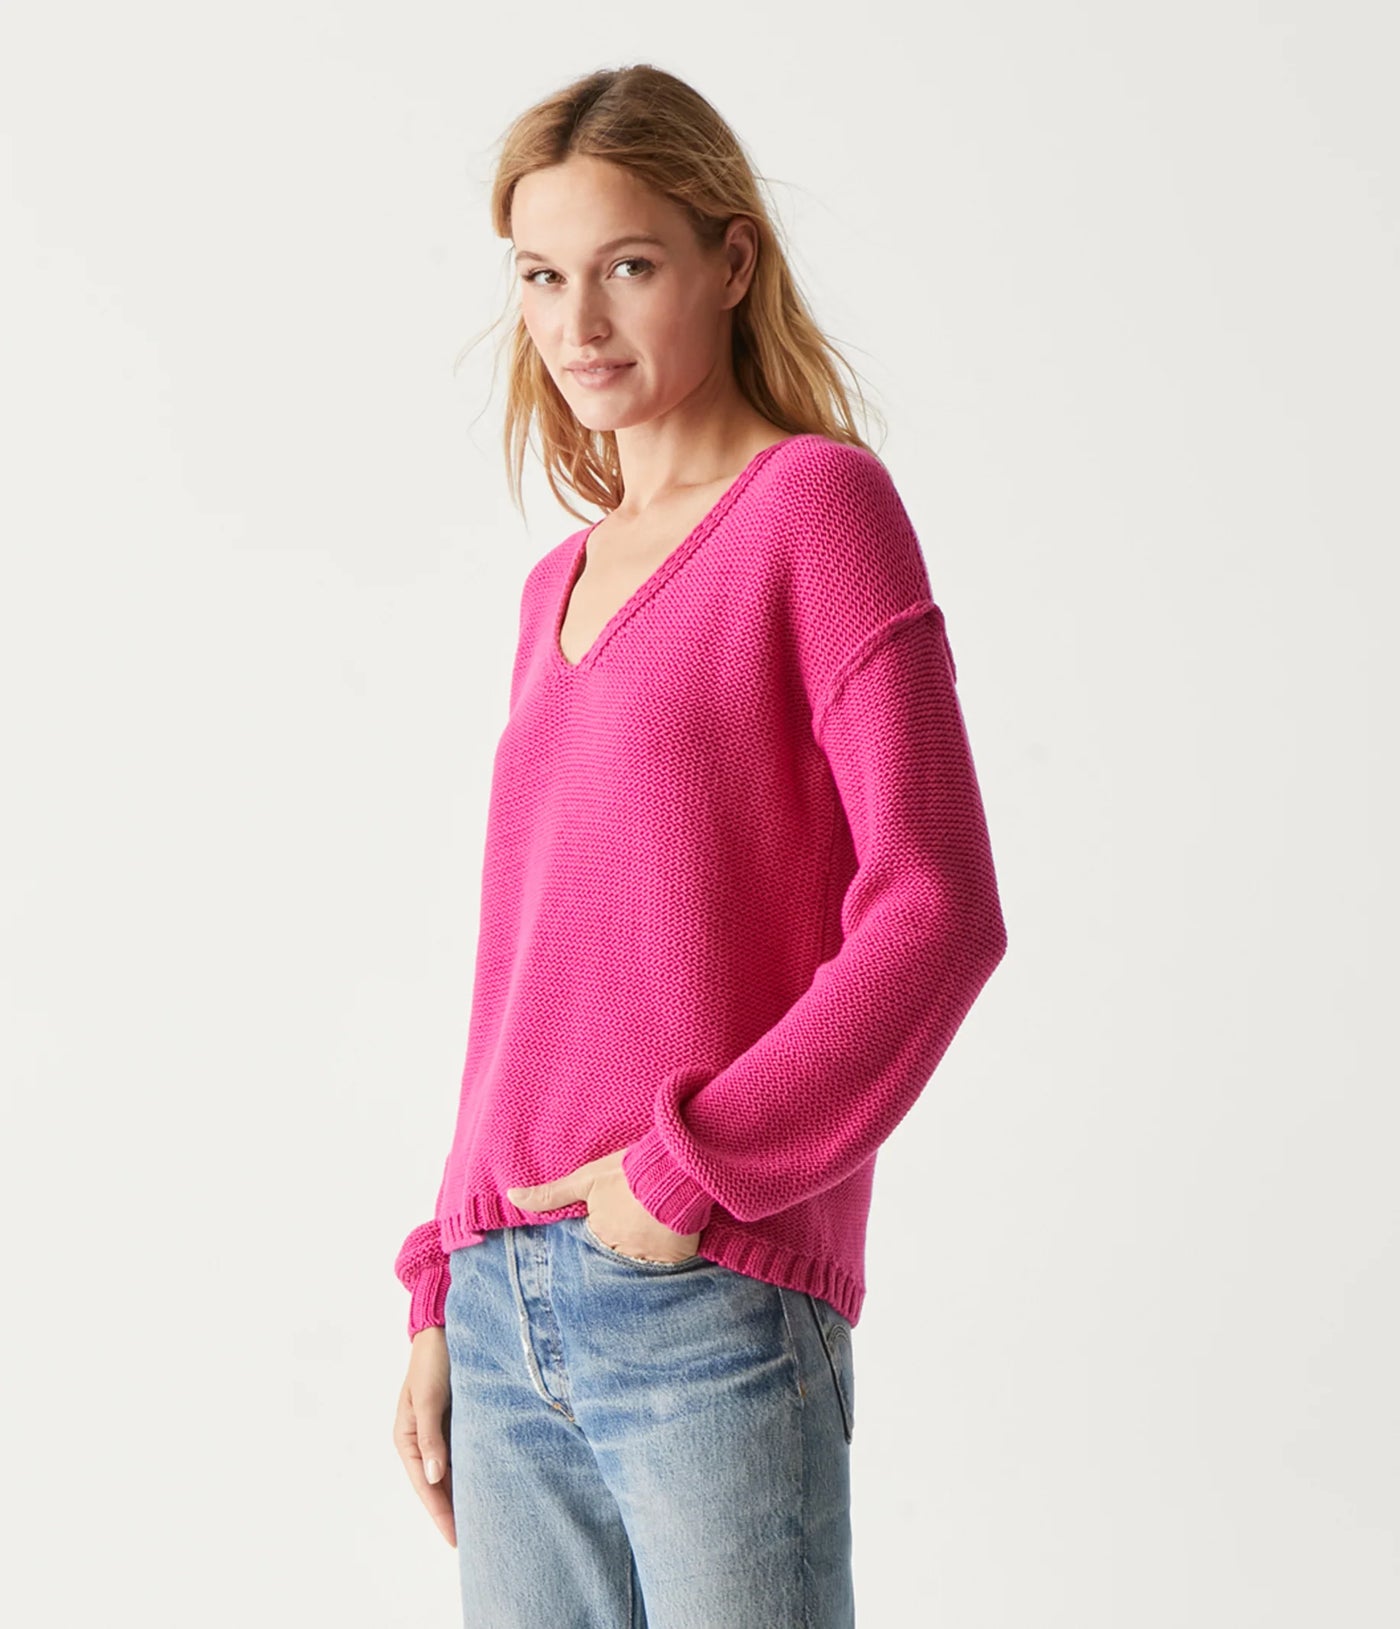 Kendra Relaxed V Neck Sweater Dk Voltage